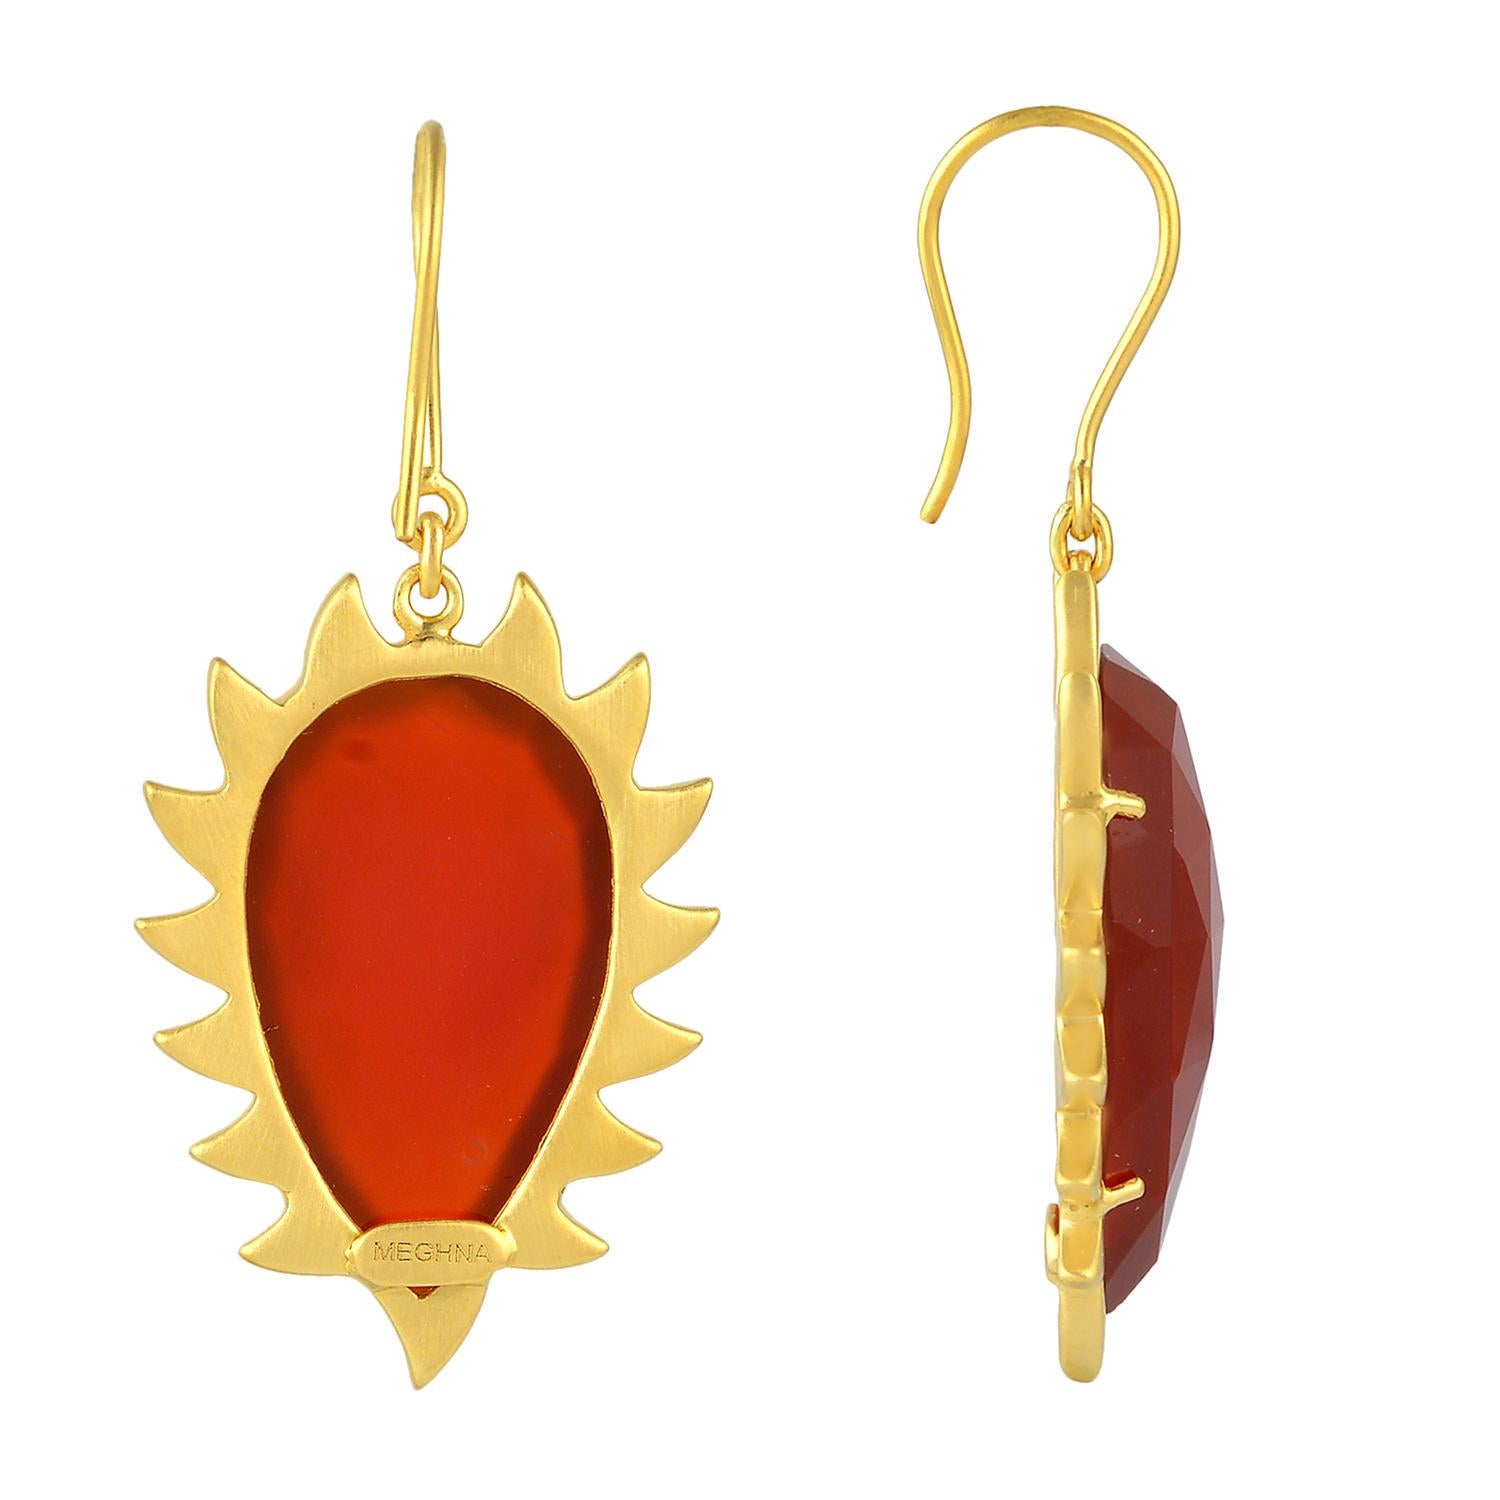 These modern and fiercely gorgeous drop earrings are handcrafted in 18K gold, sterling silver and 27.90 ct carnelian. Exquisitely framed in signature 